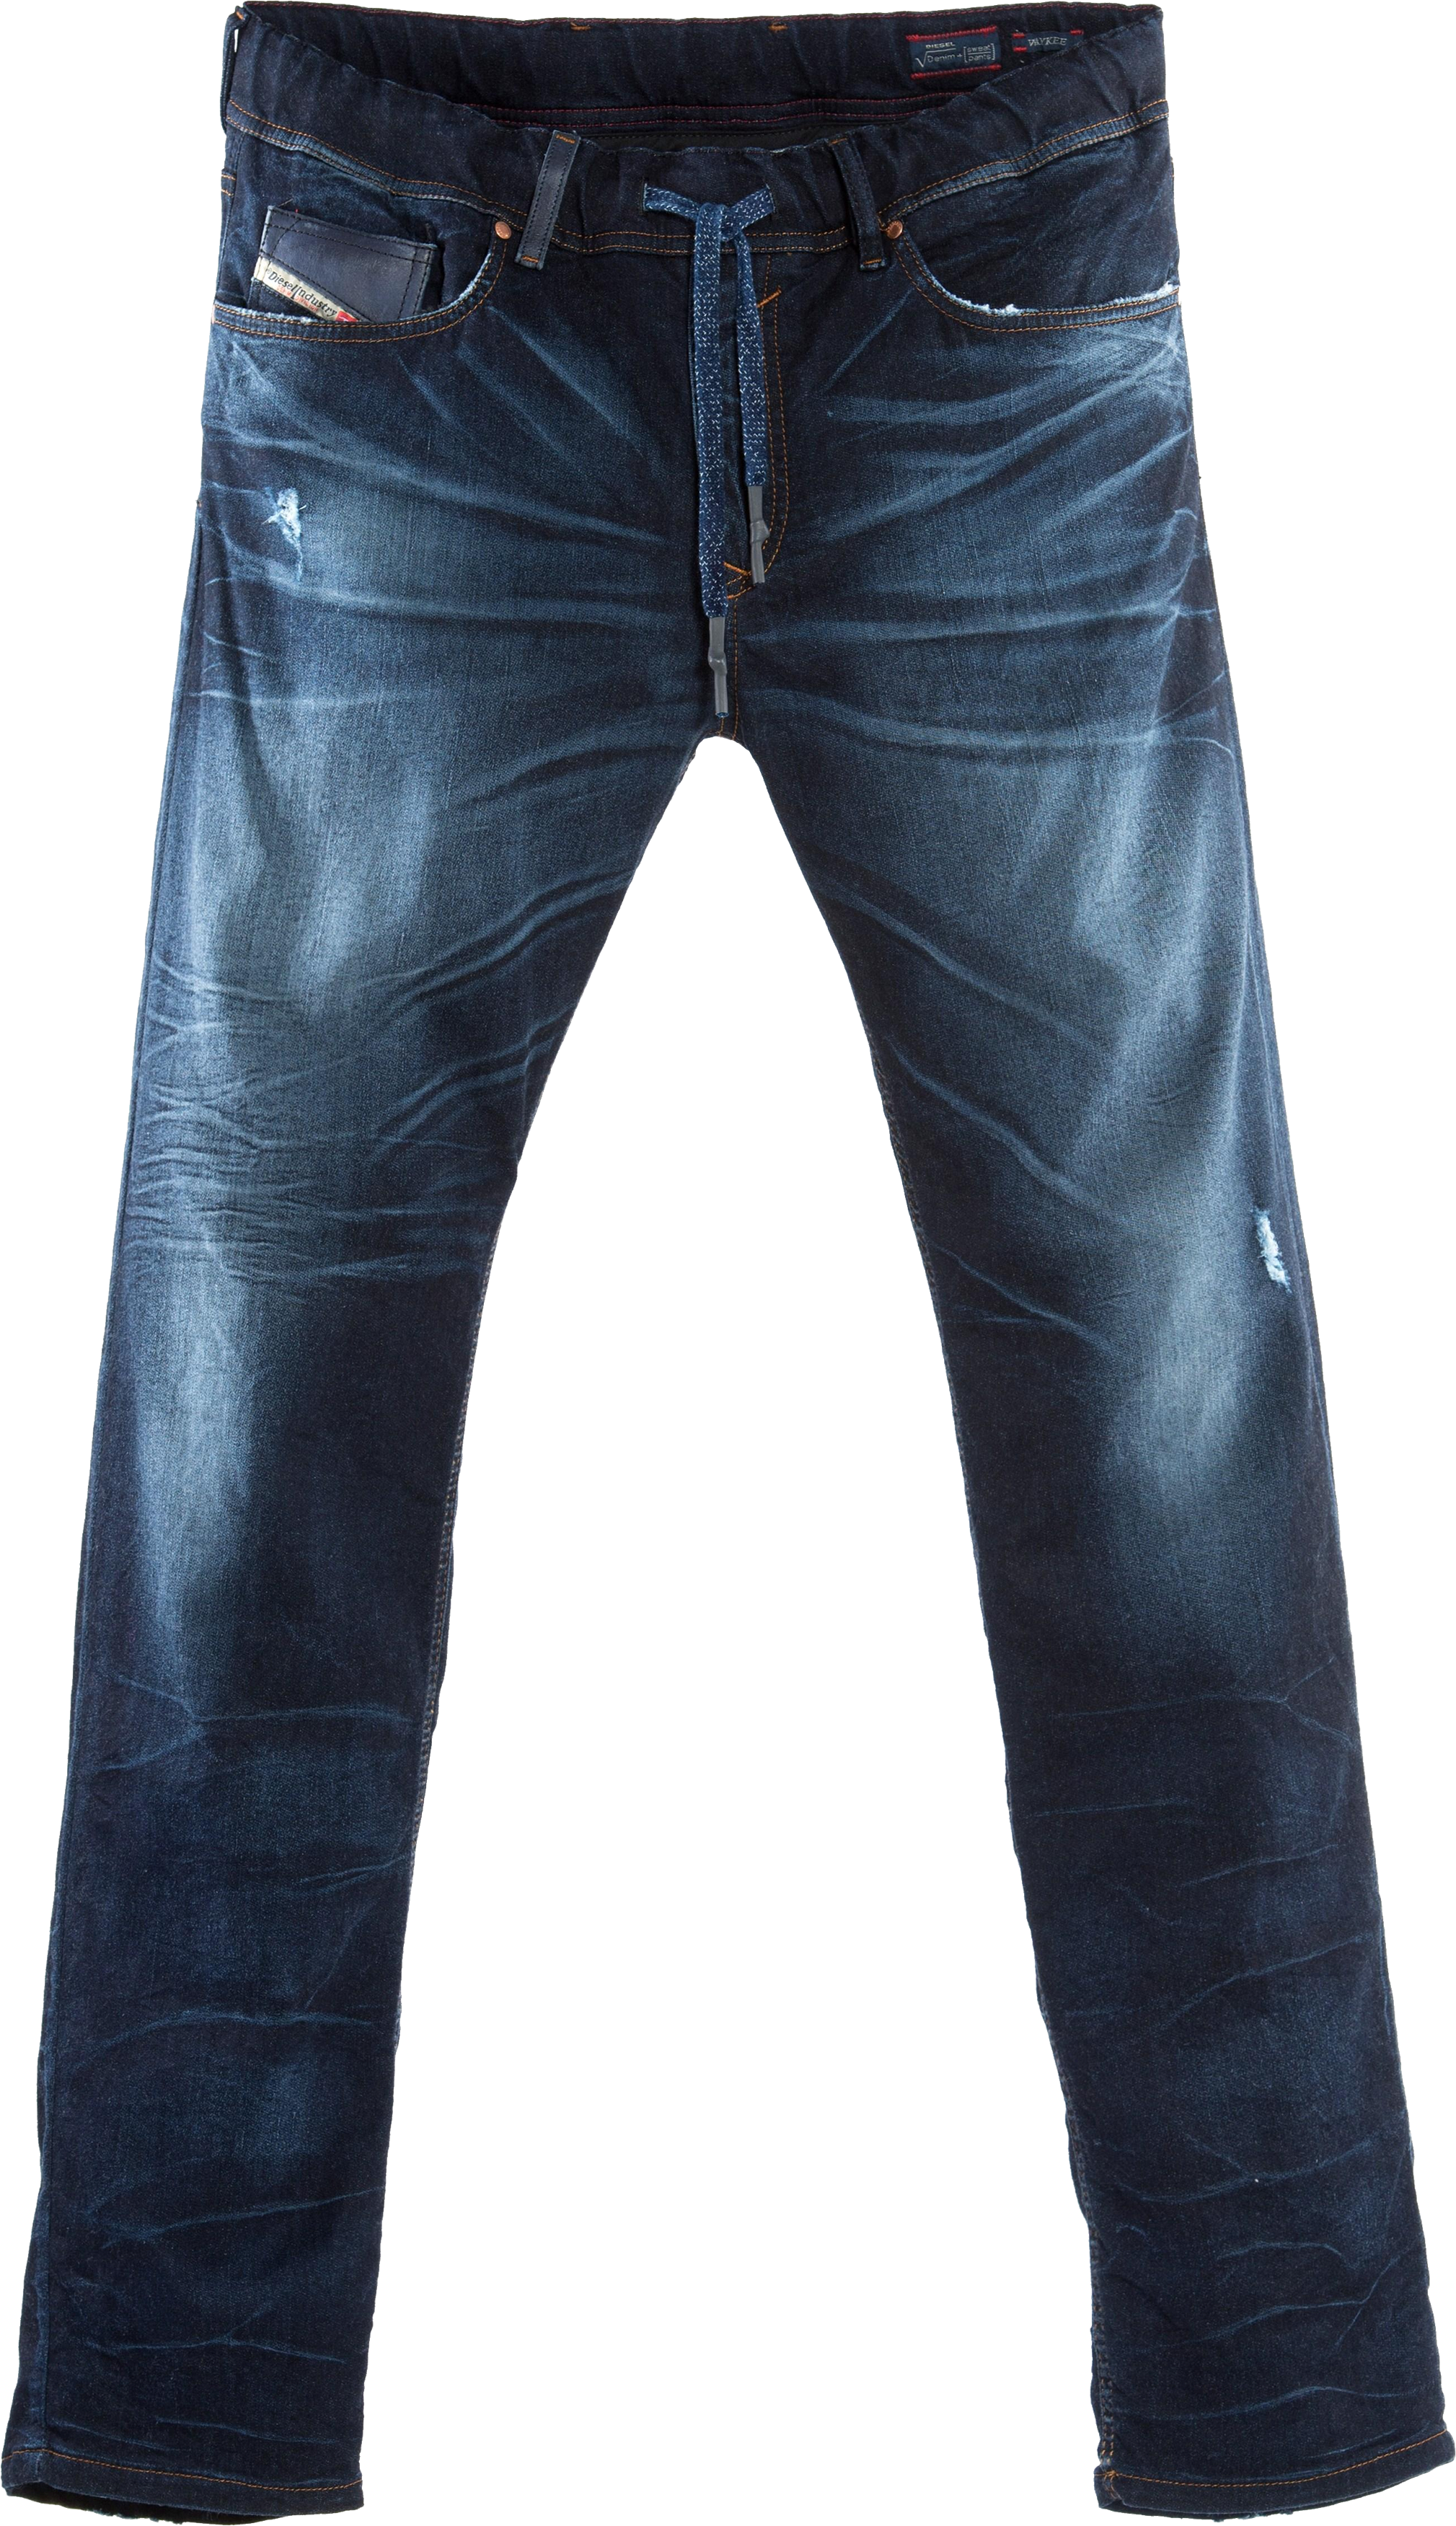 Distressed Blue Jeans PNG image